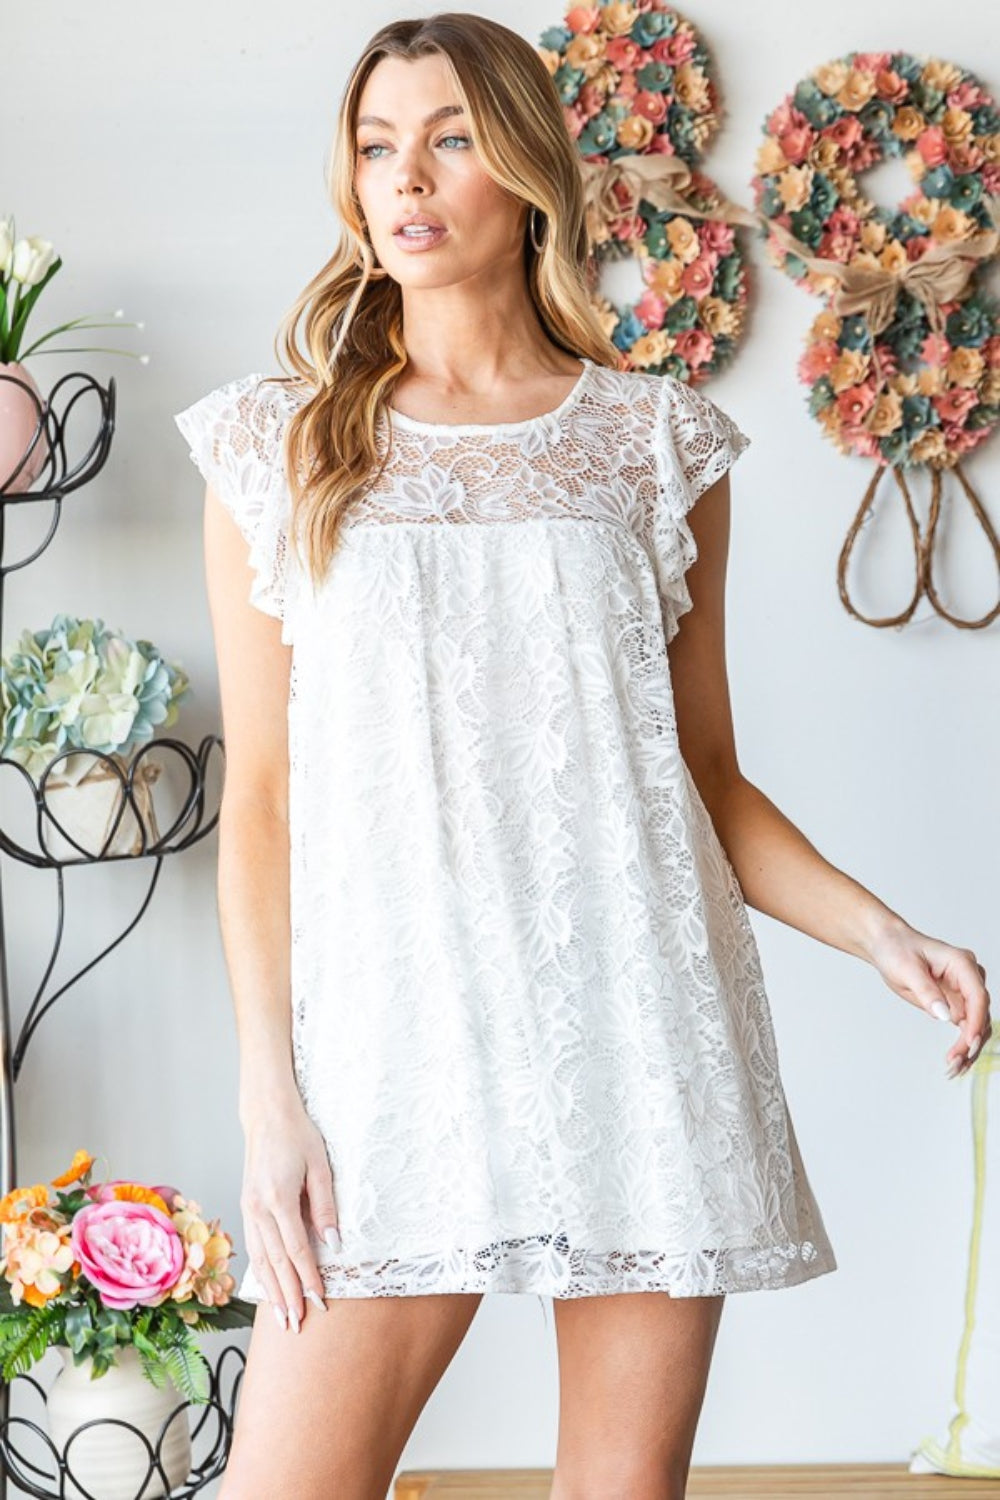 This round neck cap sleeve lace top is elegant and feminine, perfect for any occasion. The delicate lace detailing adds a touch of sophistication, while the cap sleeves provide a flattering and comfortable fit.  S  - 3X